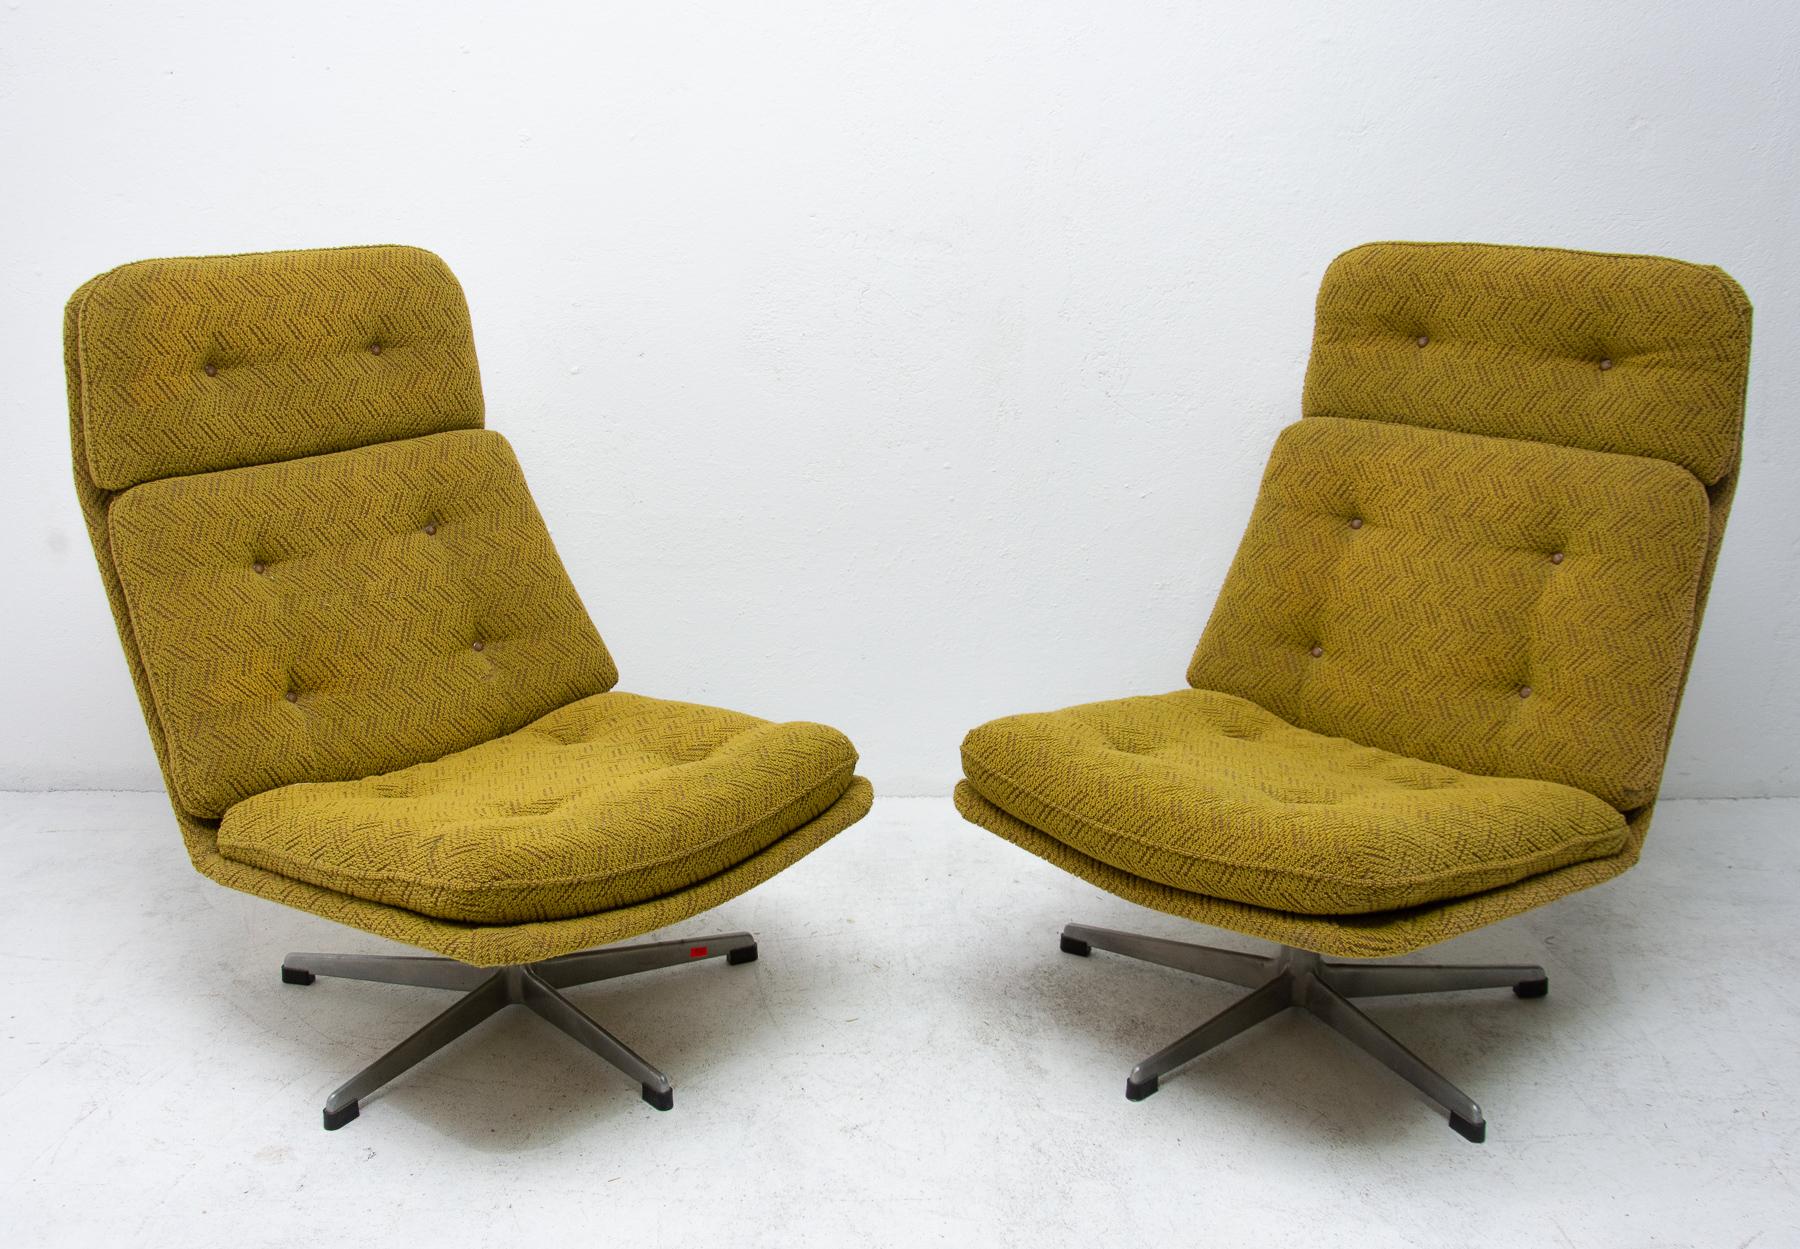 A pair of swivel chairs designed by German architect Gerald Neusser for the Czechoslovak company ÚP Závody. They were made in the former Czechoslovakia in the 1970s. The chairs are in very good condition without damage.
Price is for the